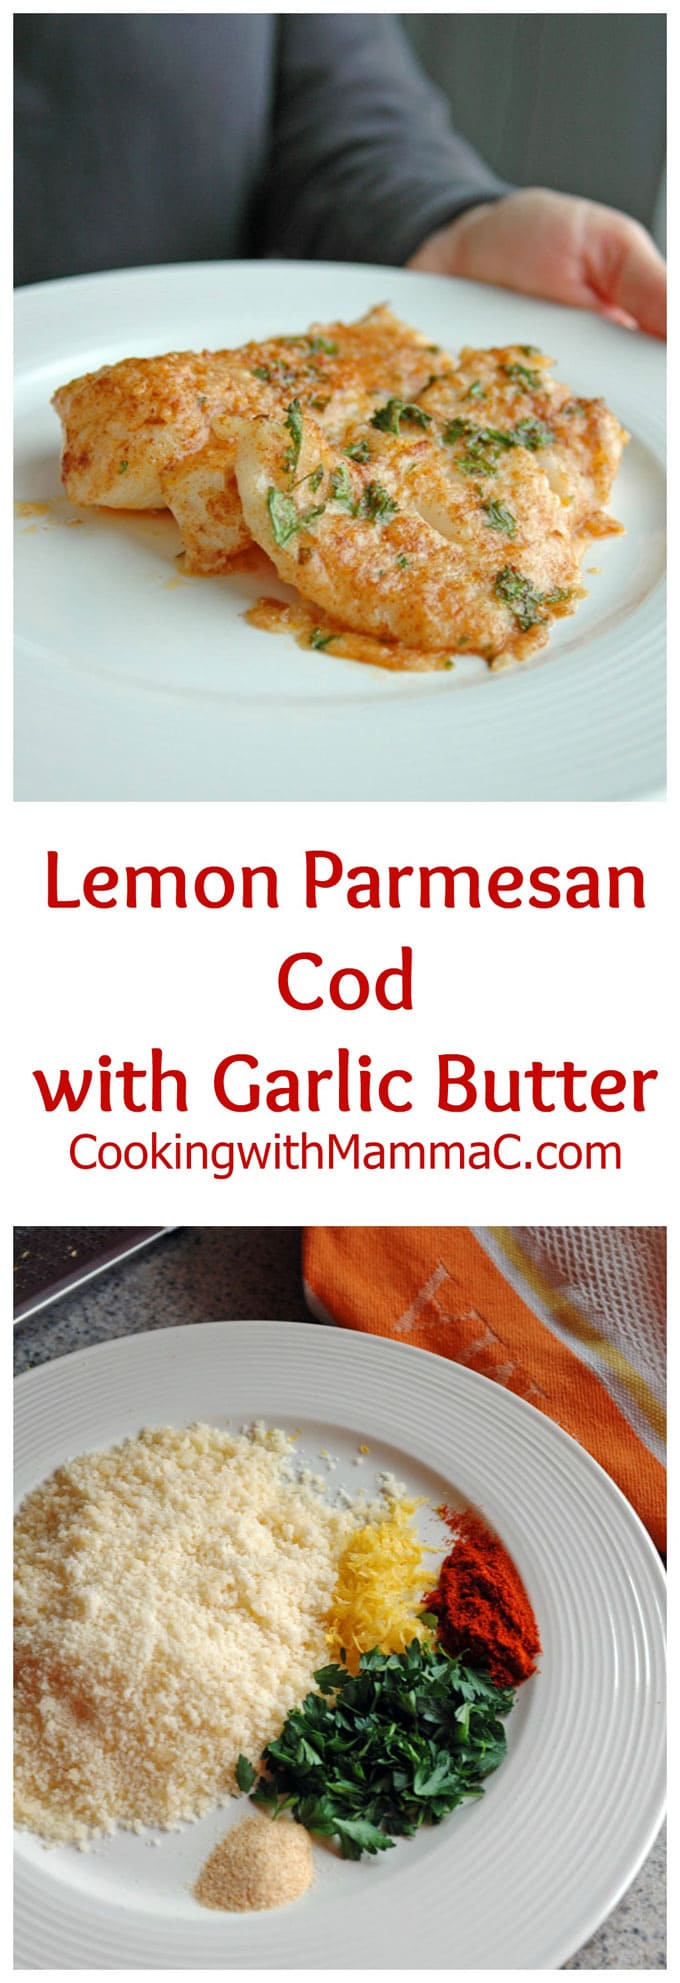 Two-photo collage of Lemon Parmesan Cod with Garlic Butter and red type explaining what it is along with CookingwithMammaC.com